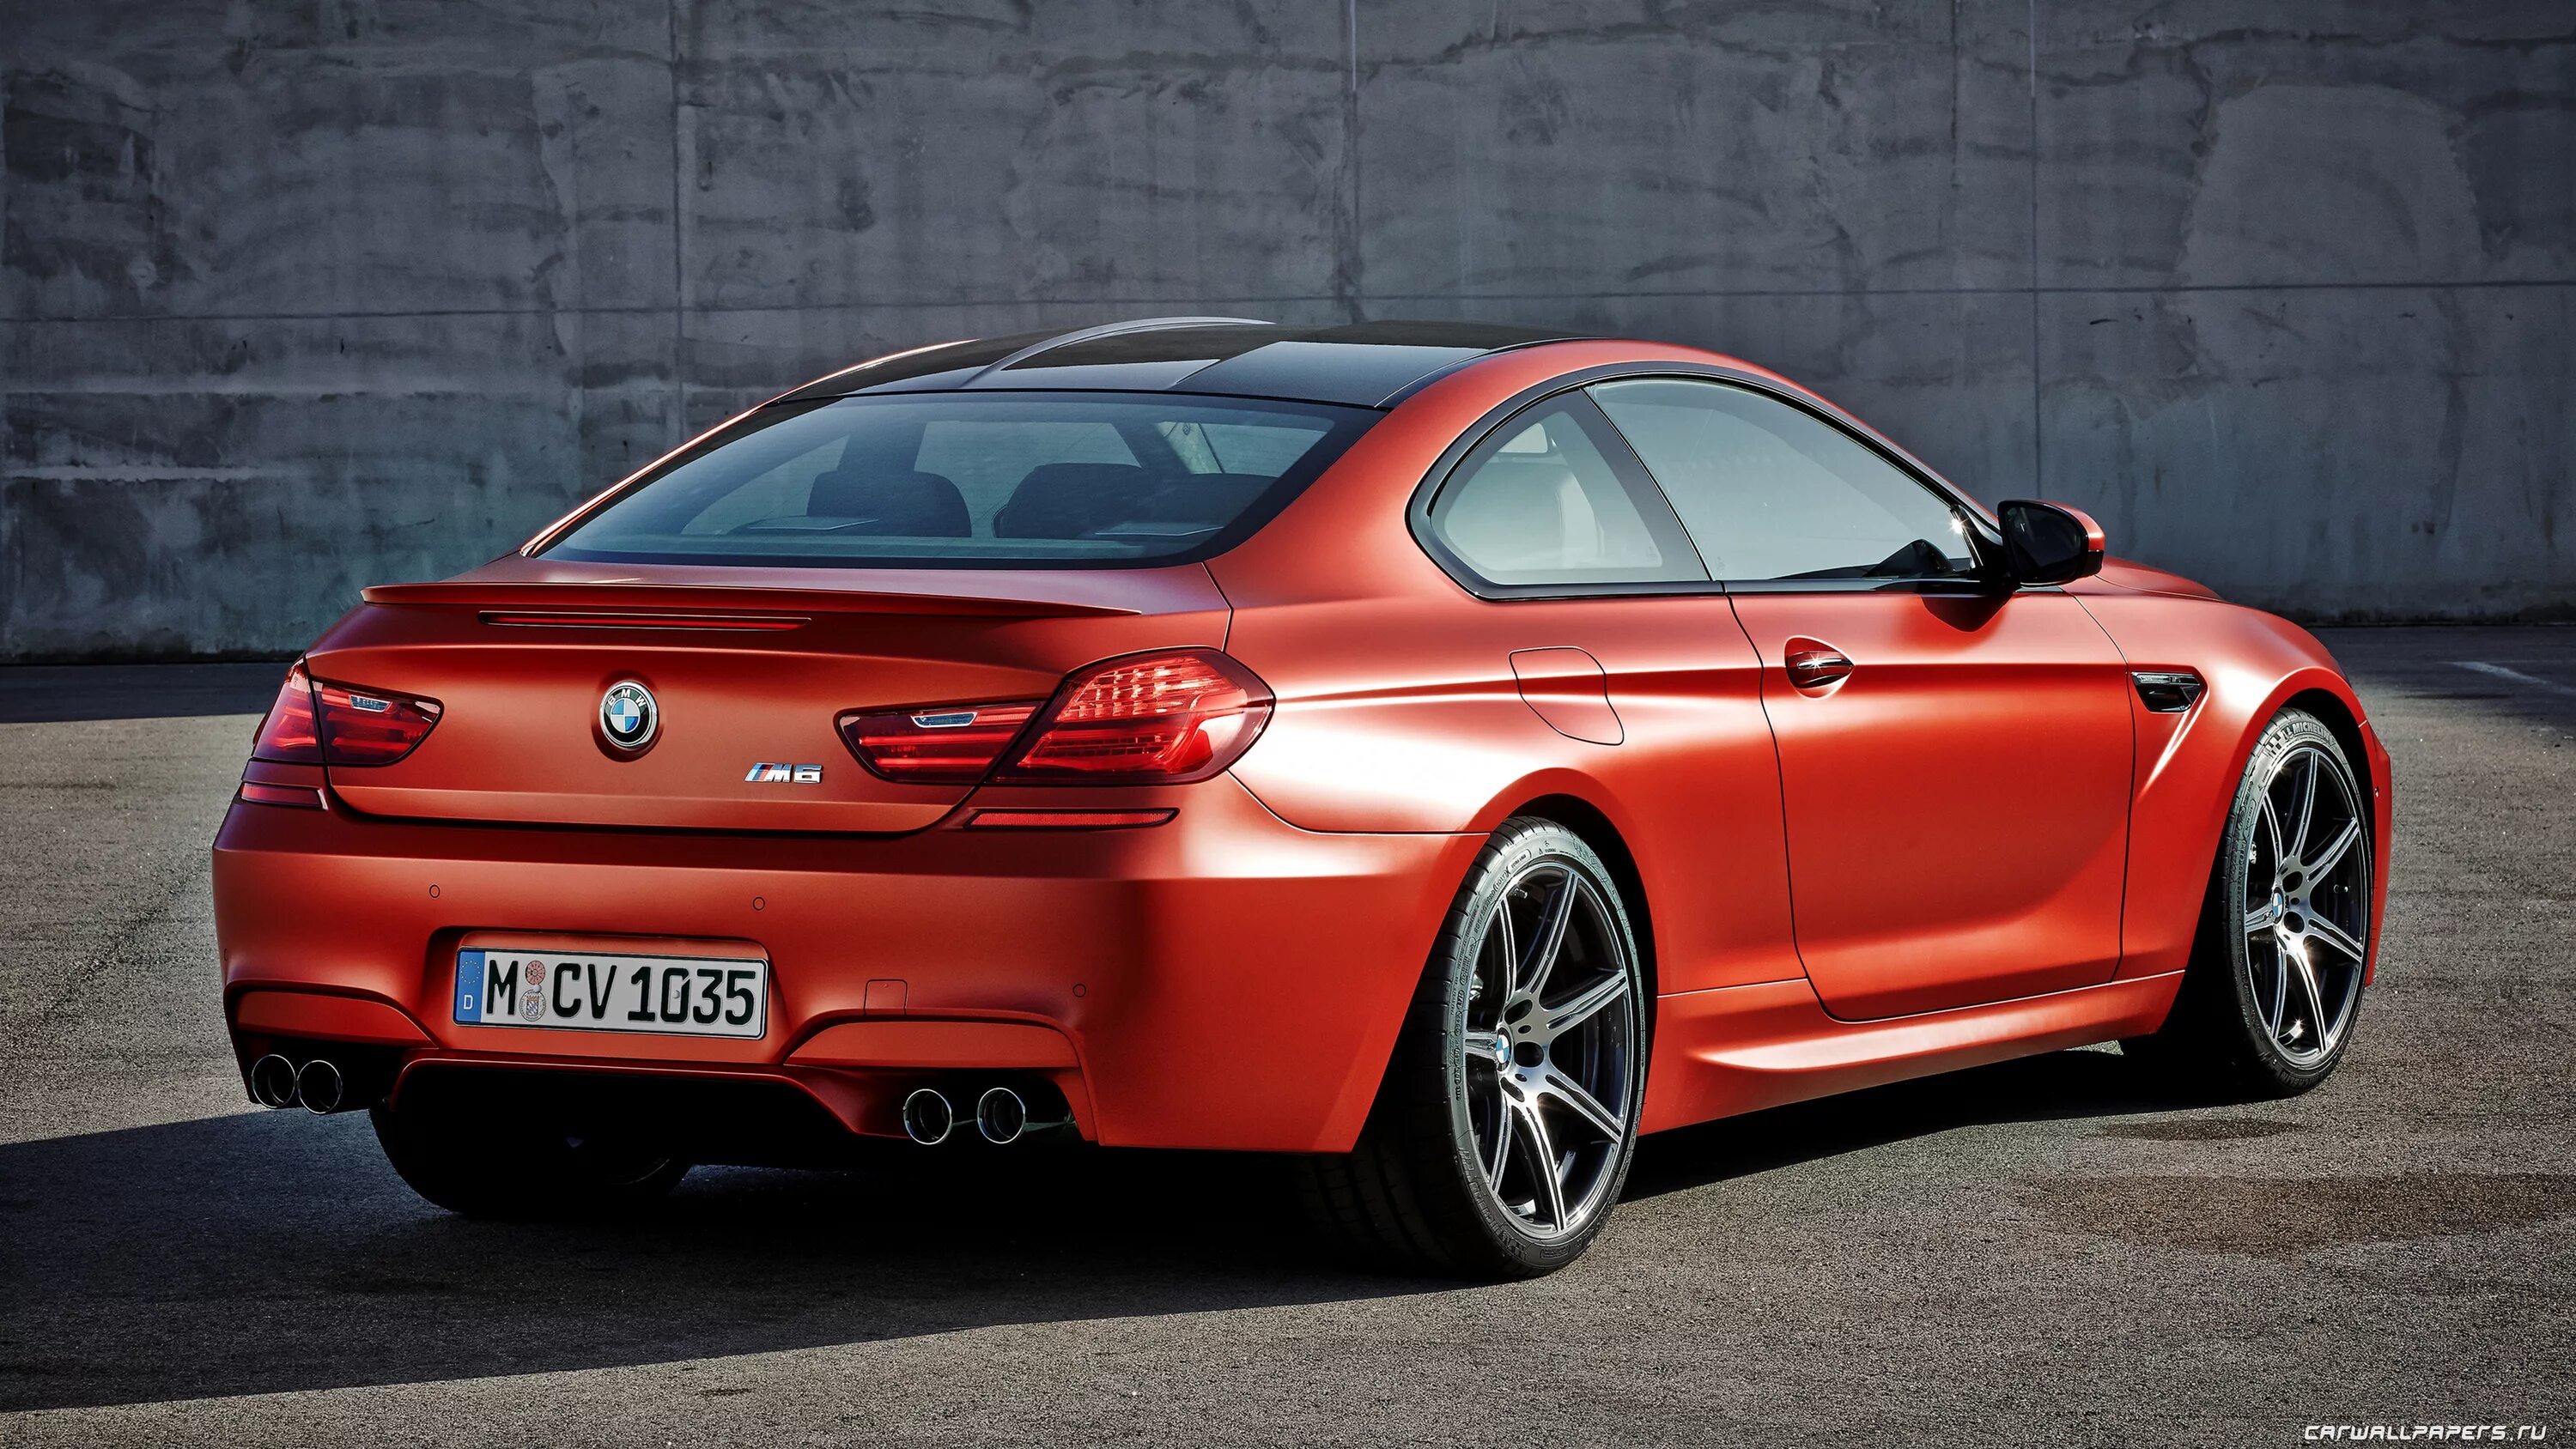 Bmw m coupe. BMW m6 Coupe. BMW m6 f13 Coupe. BMW m6 Coupe 2016. BMW m6 Coupe 4.4.